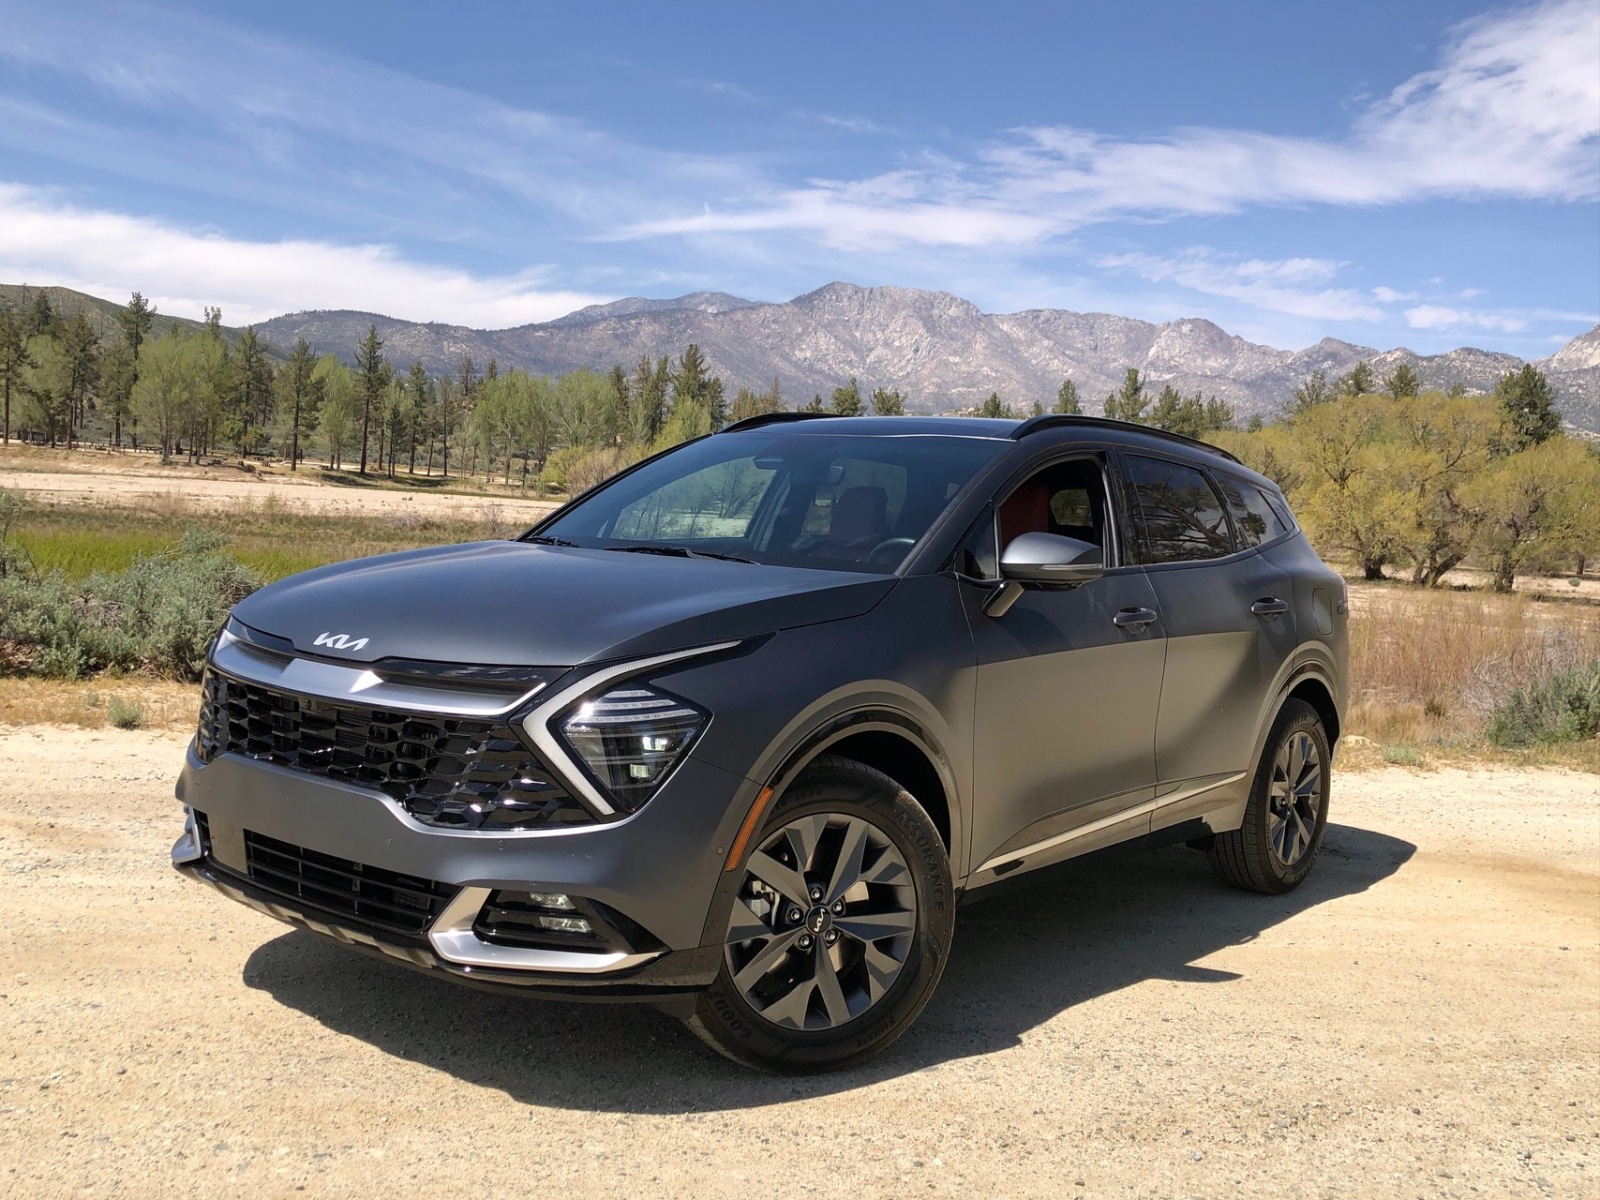 List of Comprehensive Safety Features of the 2023 Kia Sportage